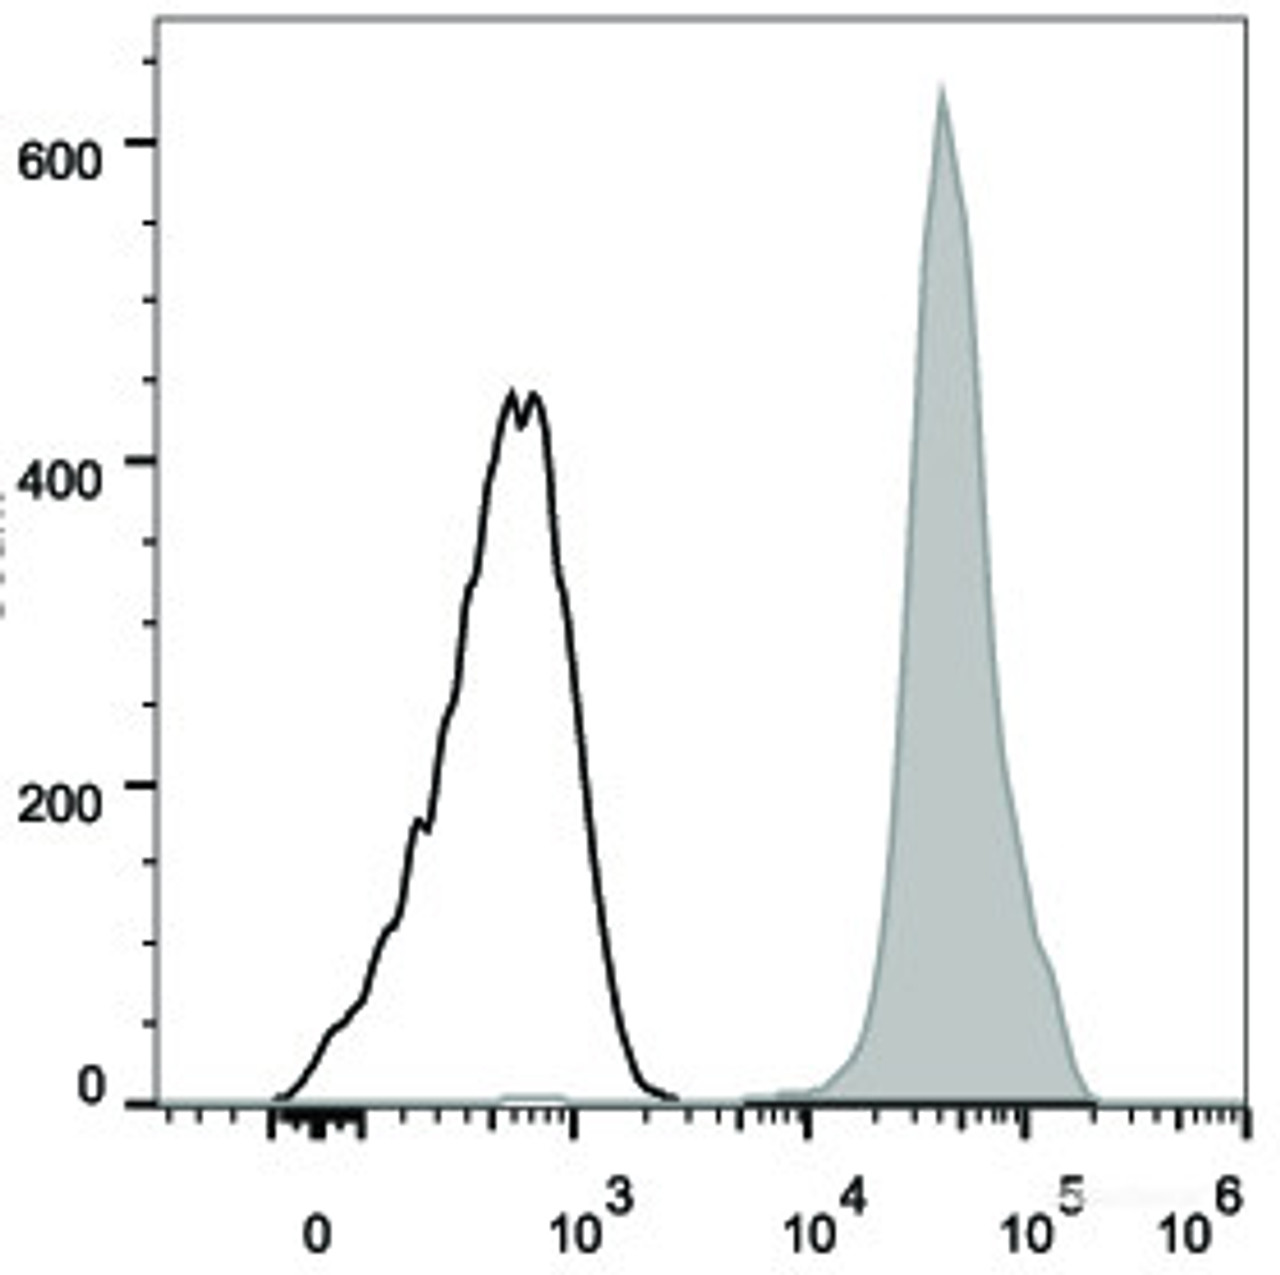 Human peripheral blood lymphocytes are stained with FITC Anti-Human CD44 Antibody(filled gray histogram). Unstained lymphocytes (empty black histogram) are used as control.